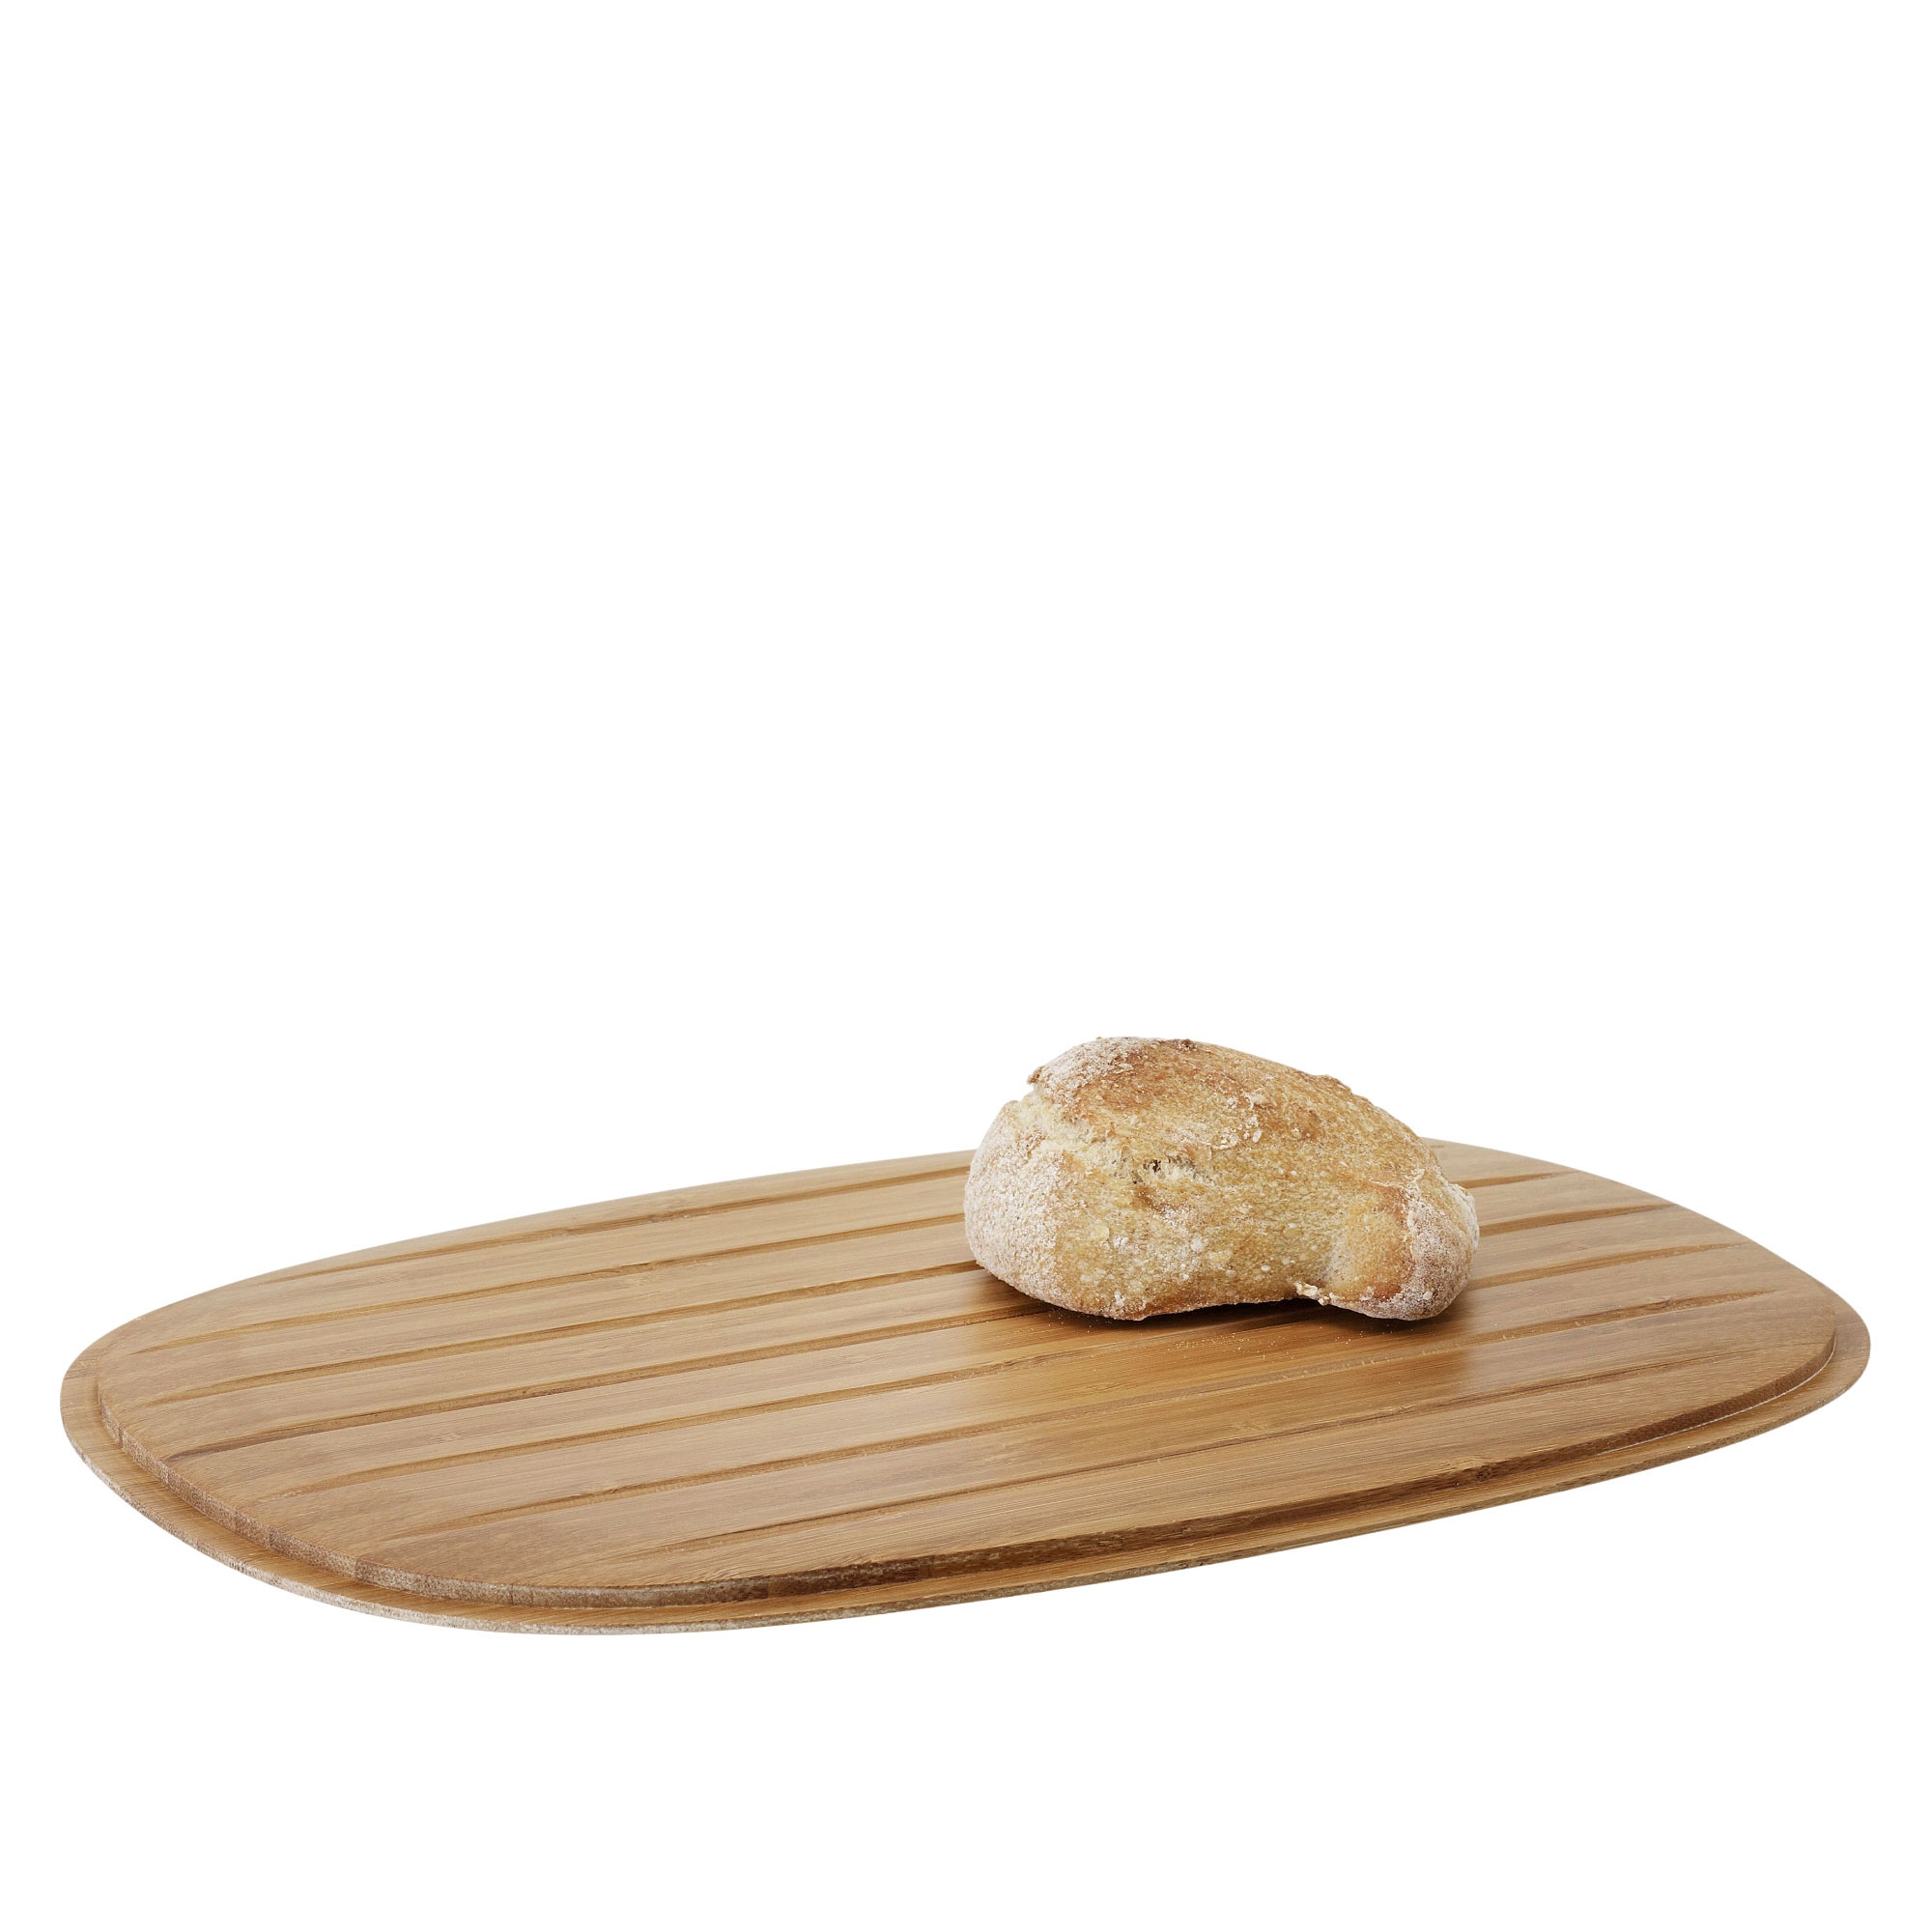 stelton - Bamboo lid for the BOX-IT bread box